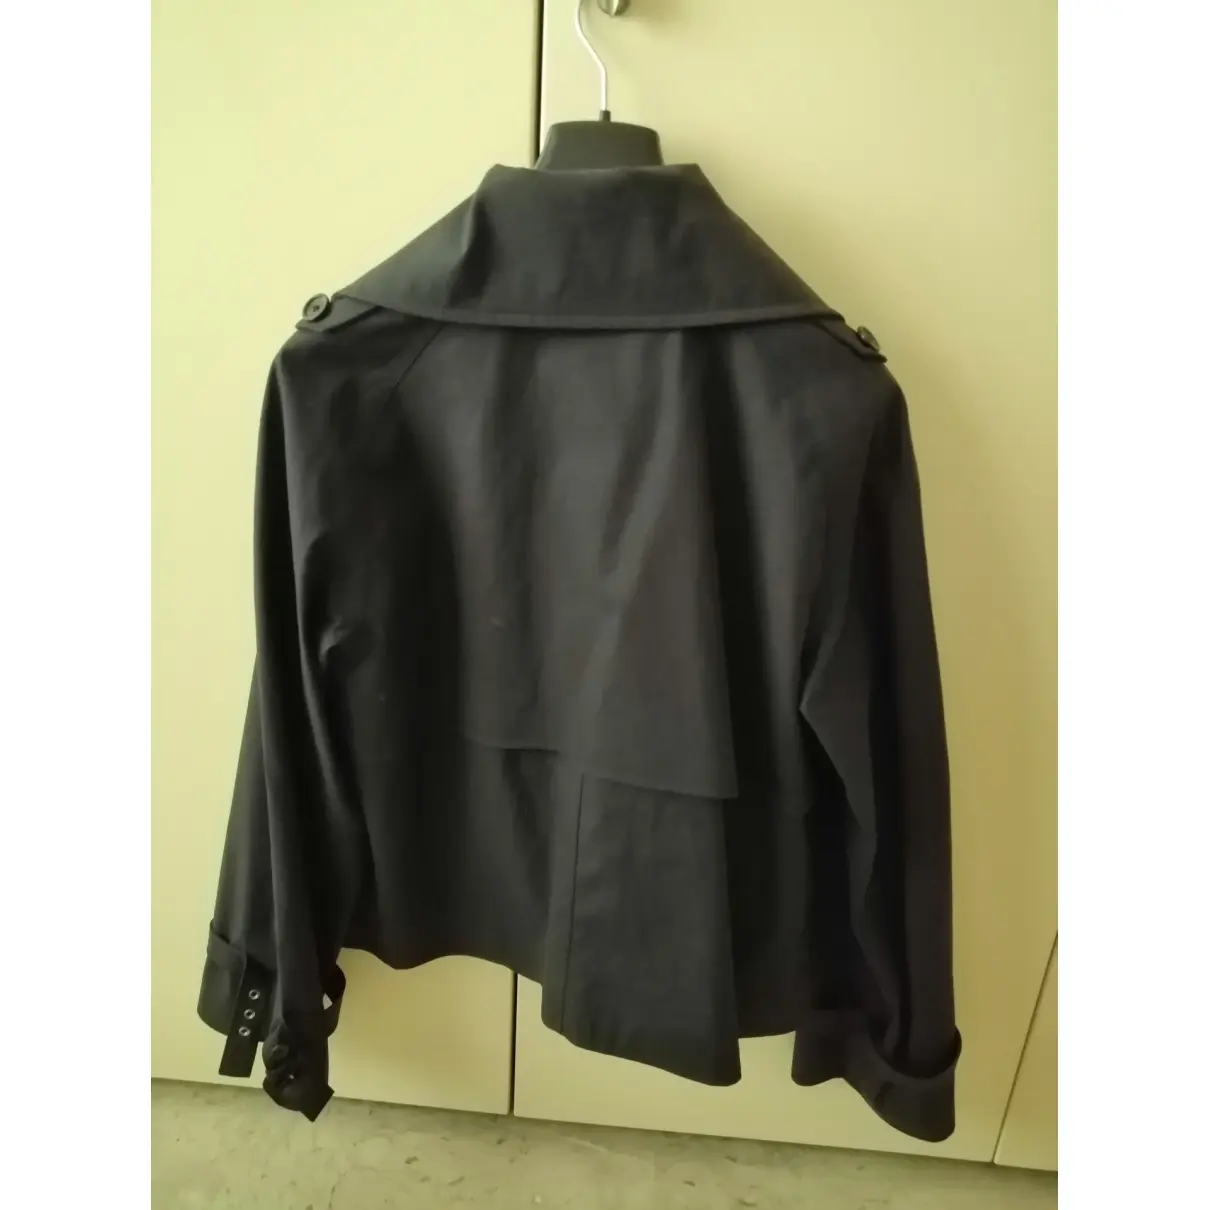 Gucci Peacoat for sale - Vintage